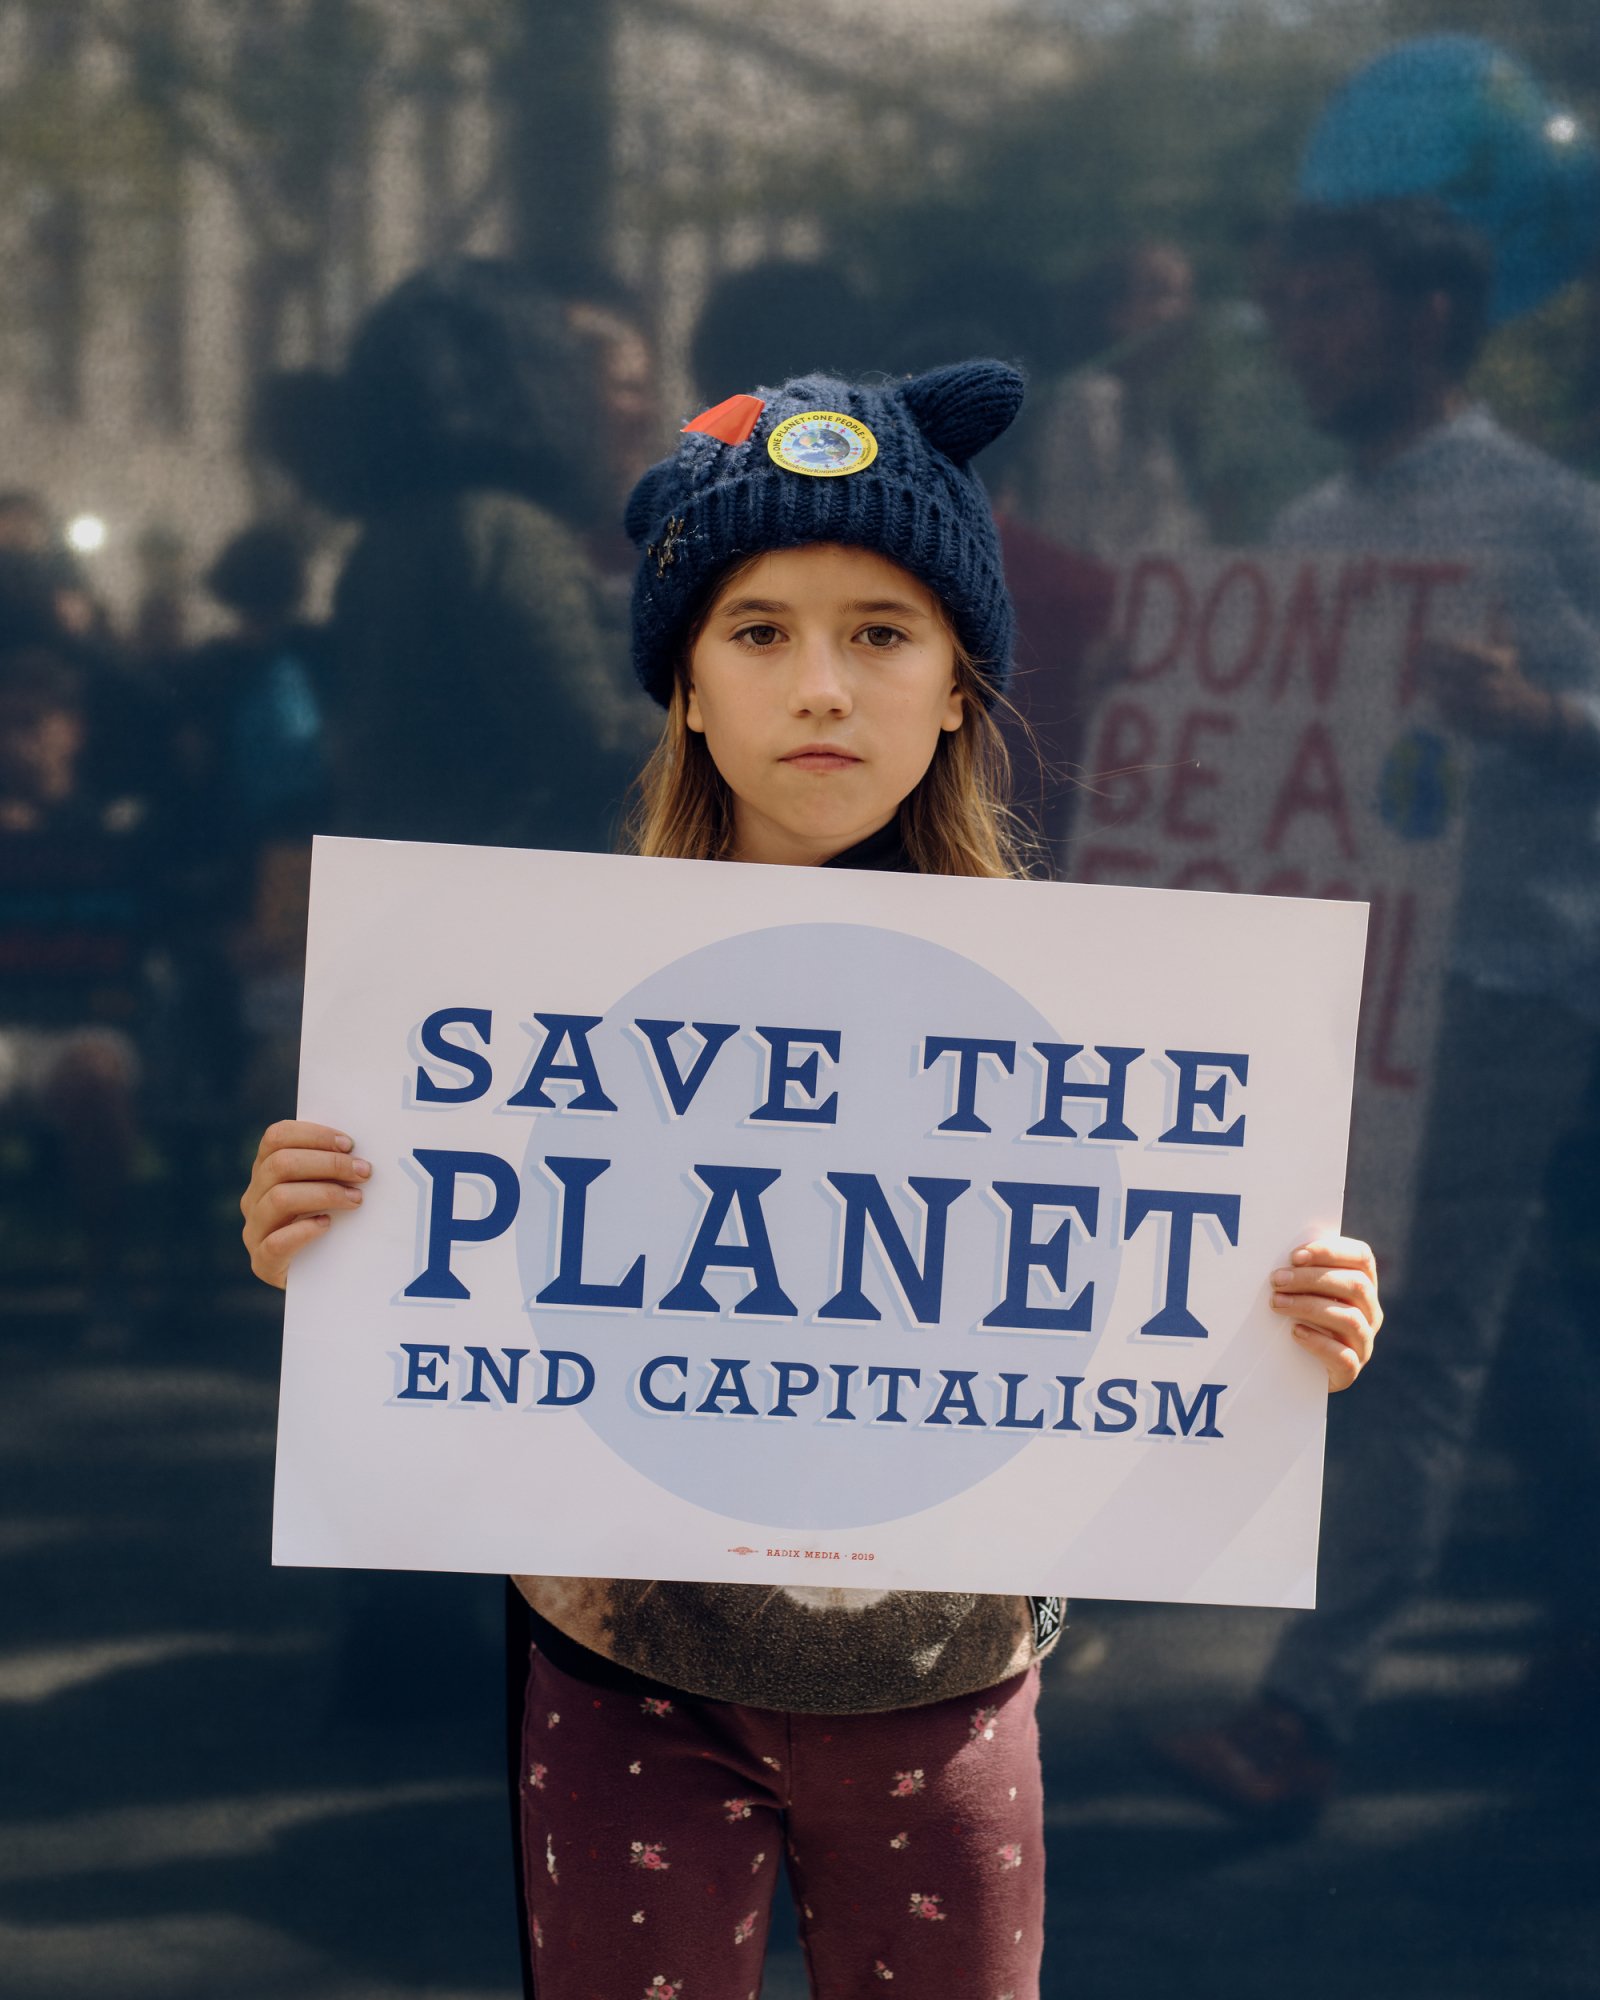  Portraits from climate strike. Bryan Thomas/The Guardian